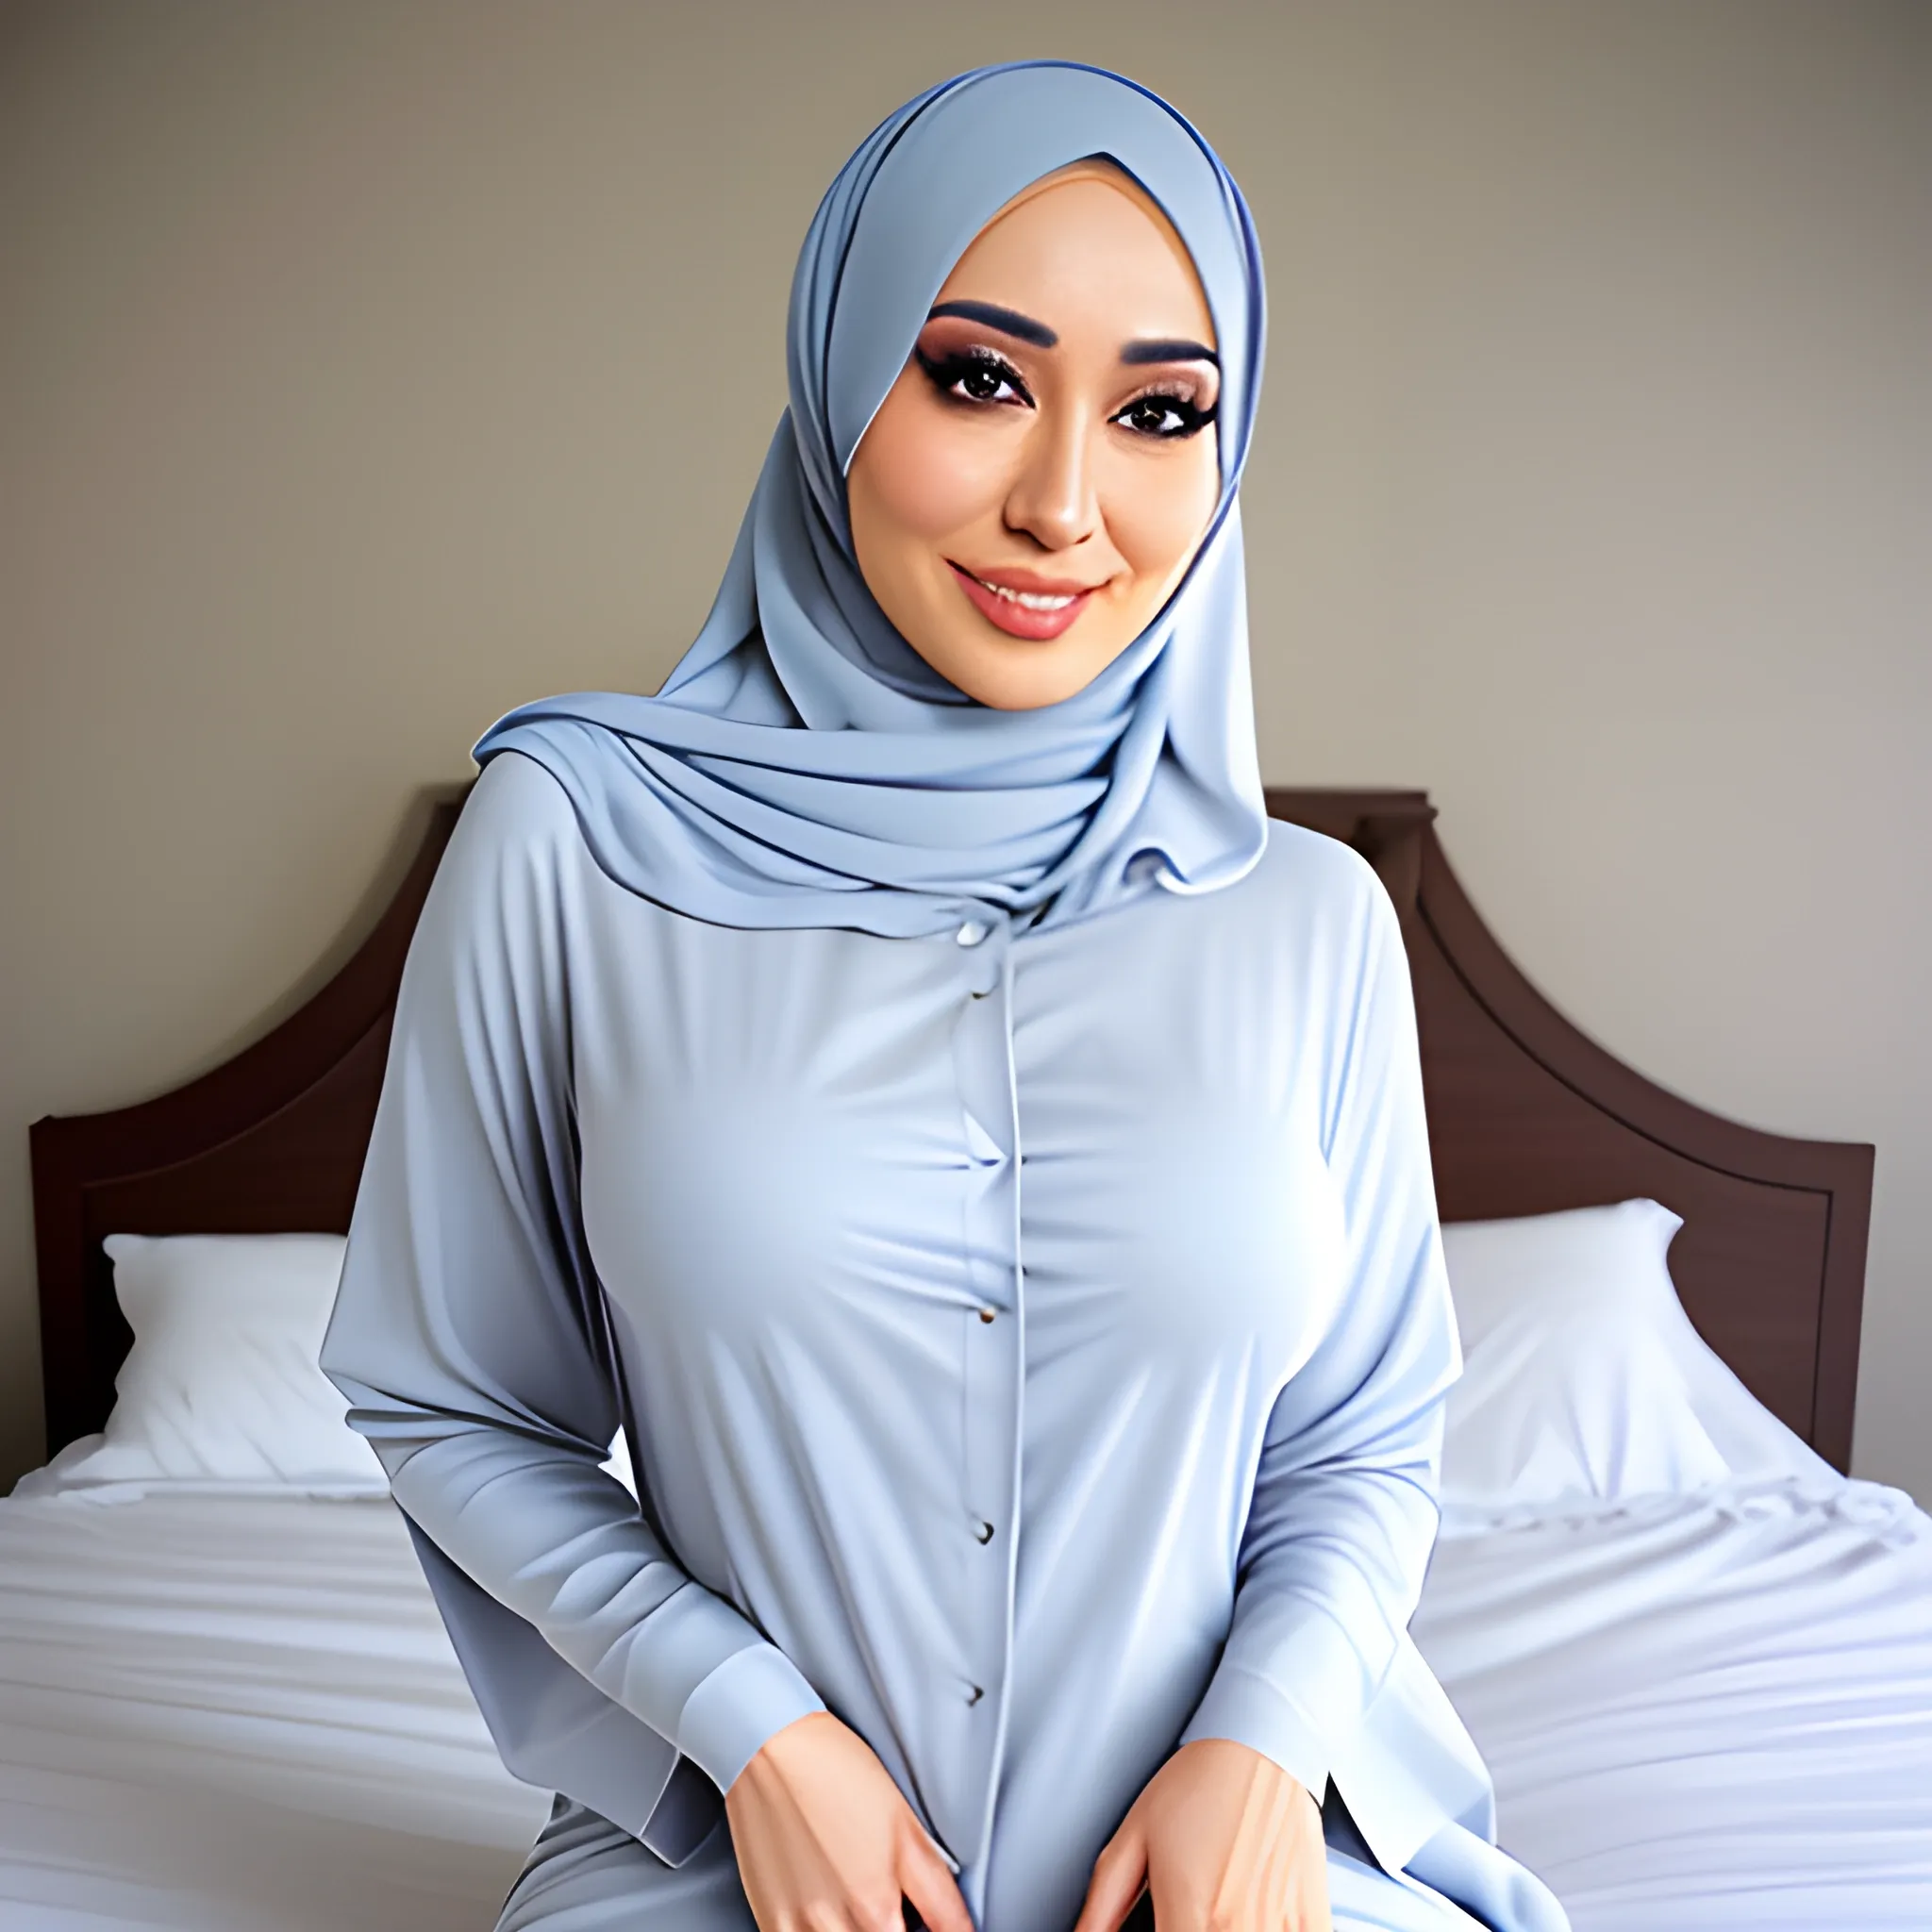 Hijab girl in bed

